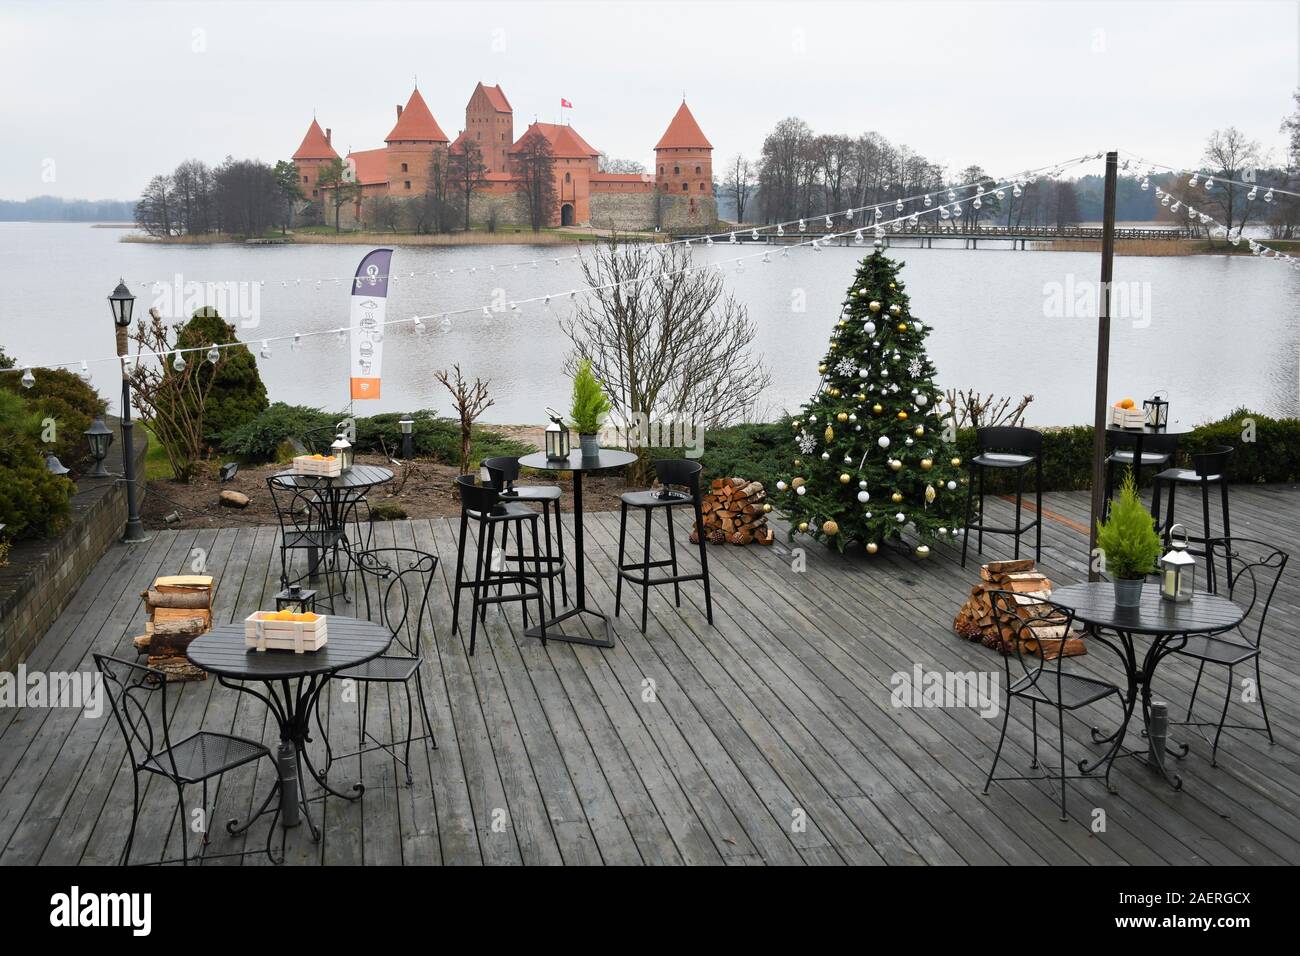 Medieval castle of Trakai, Vilnius, Lithuania, Eastern Europe, located between beautiful lakes and nature, view from a restaurant with Christmas tree Stock Photo